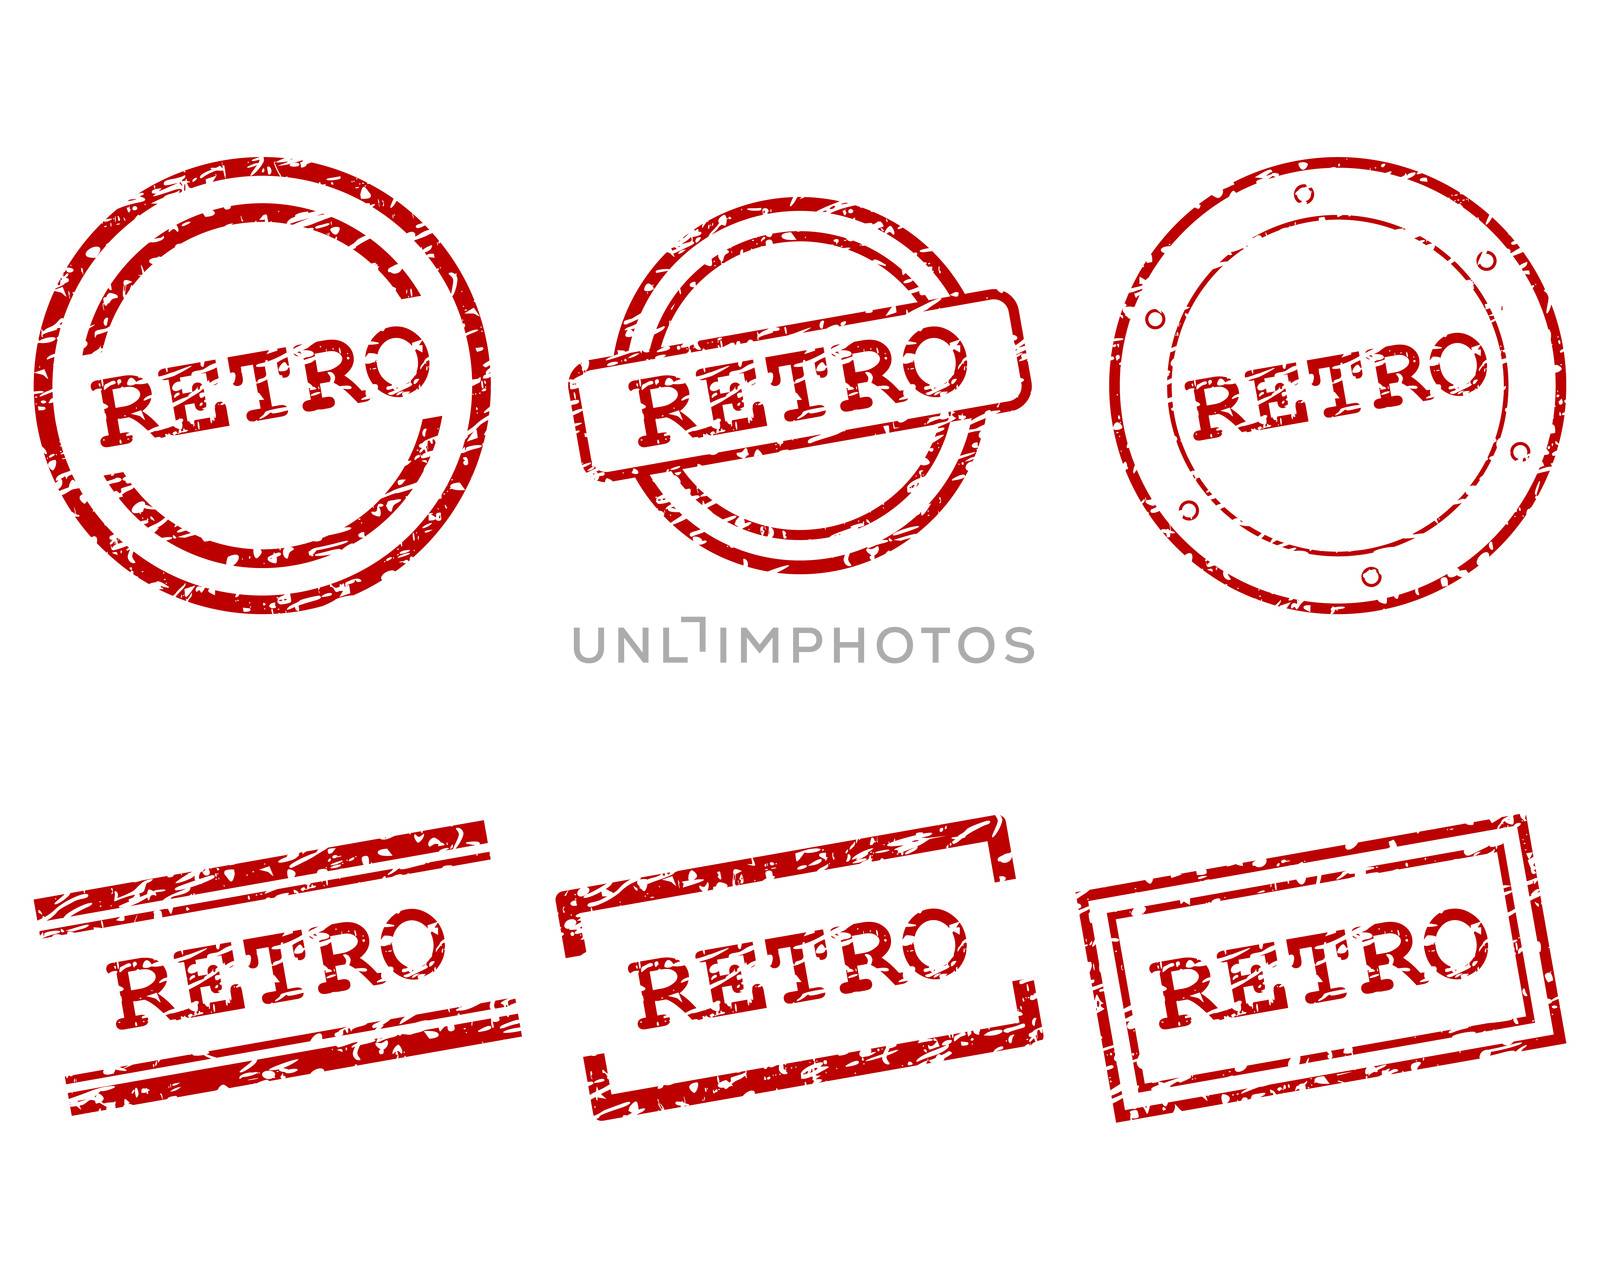 Retro stamps by rbiedermann